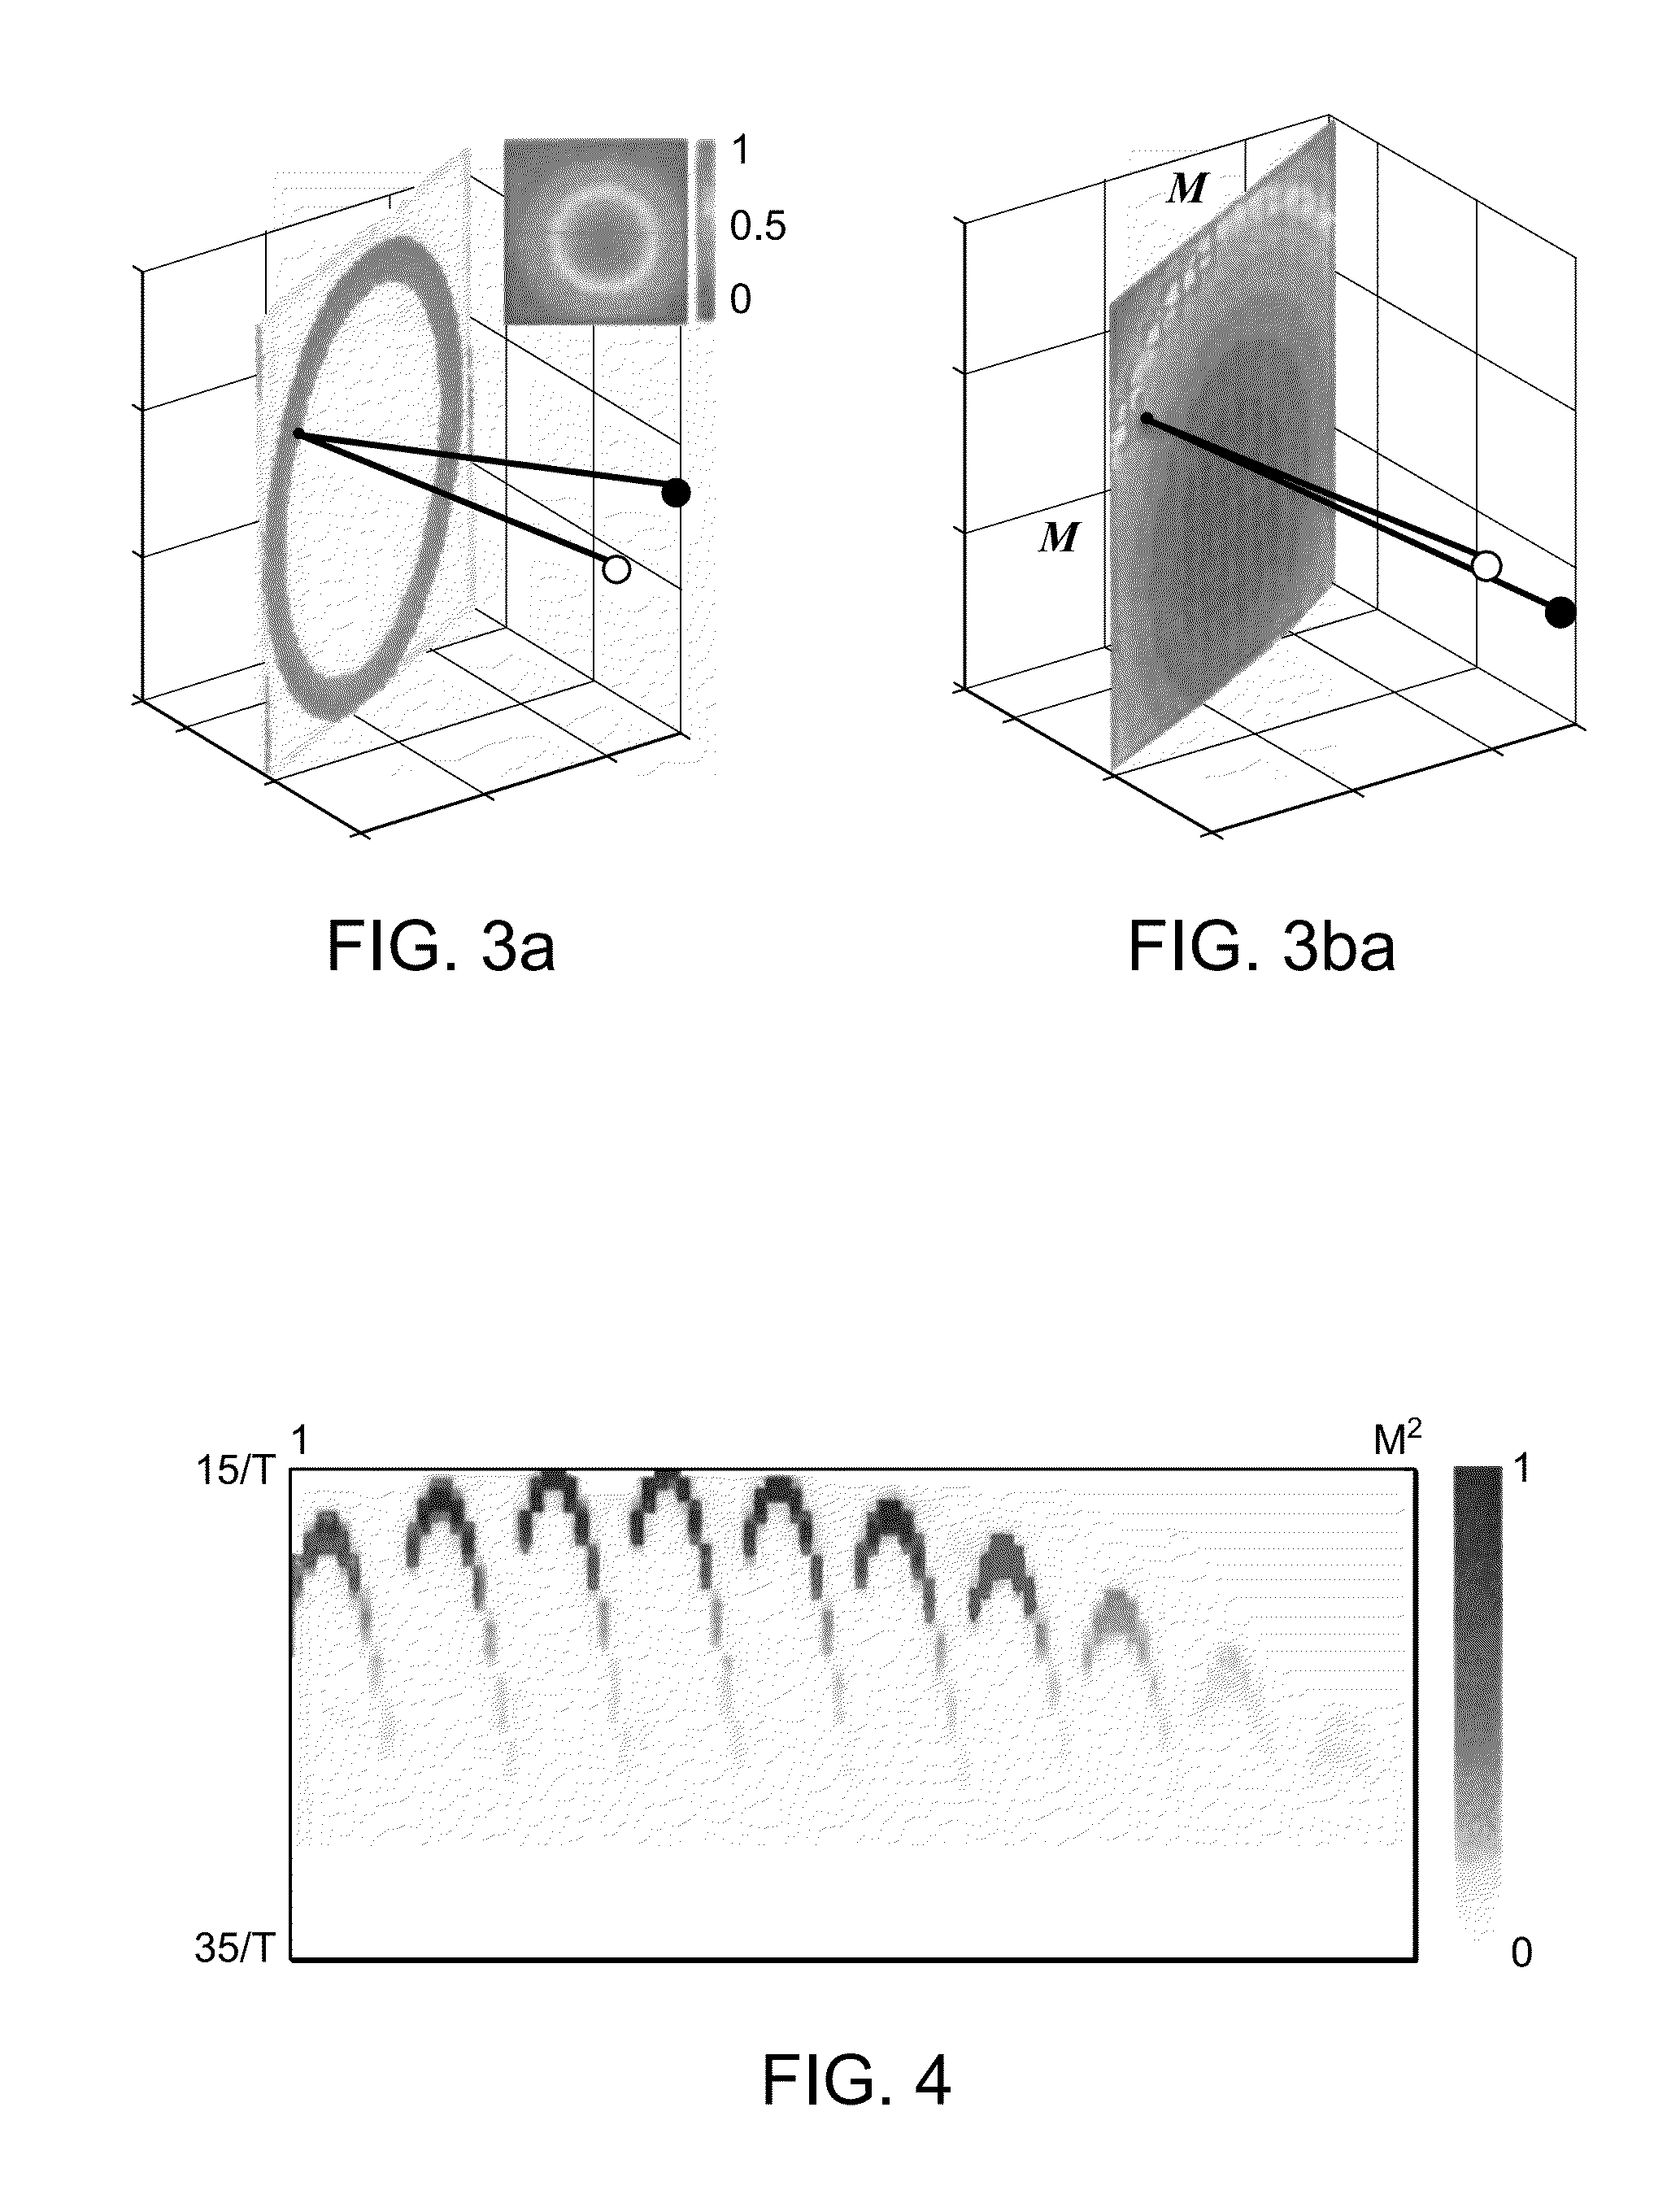 System and method for diffuse imaging with time-varying illumination intensity